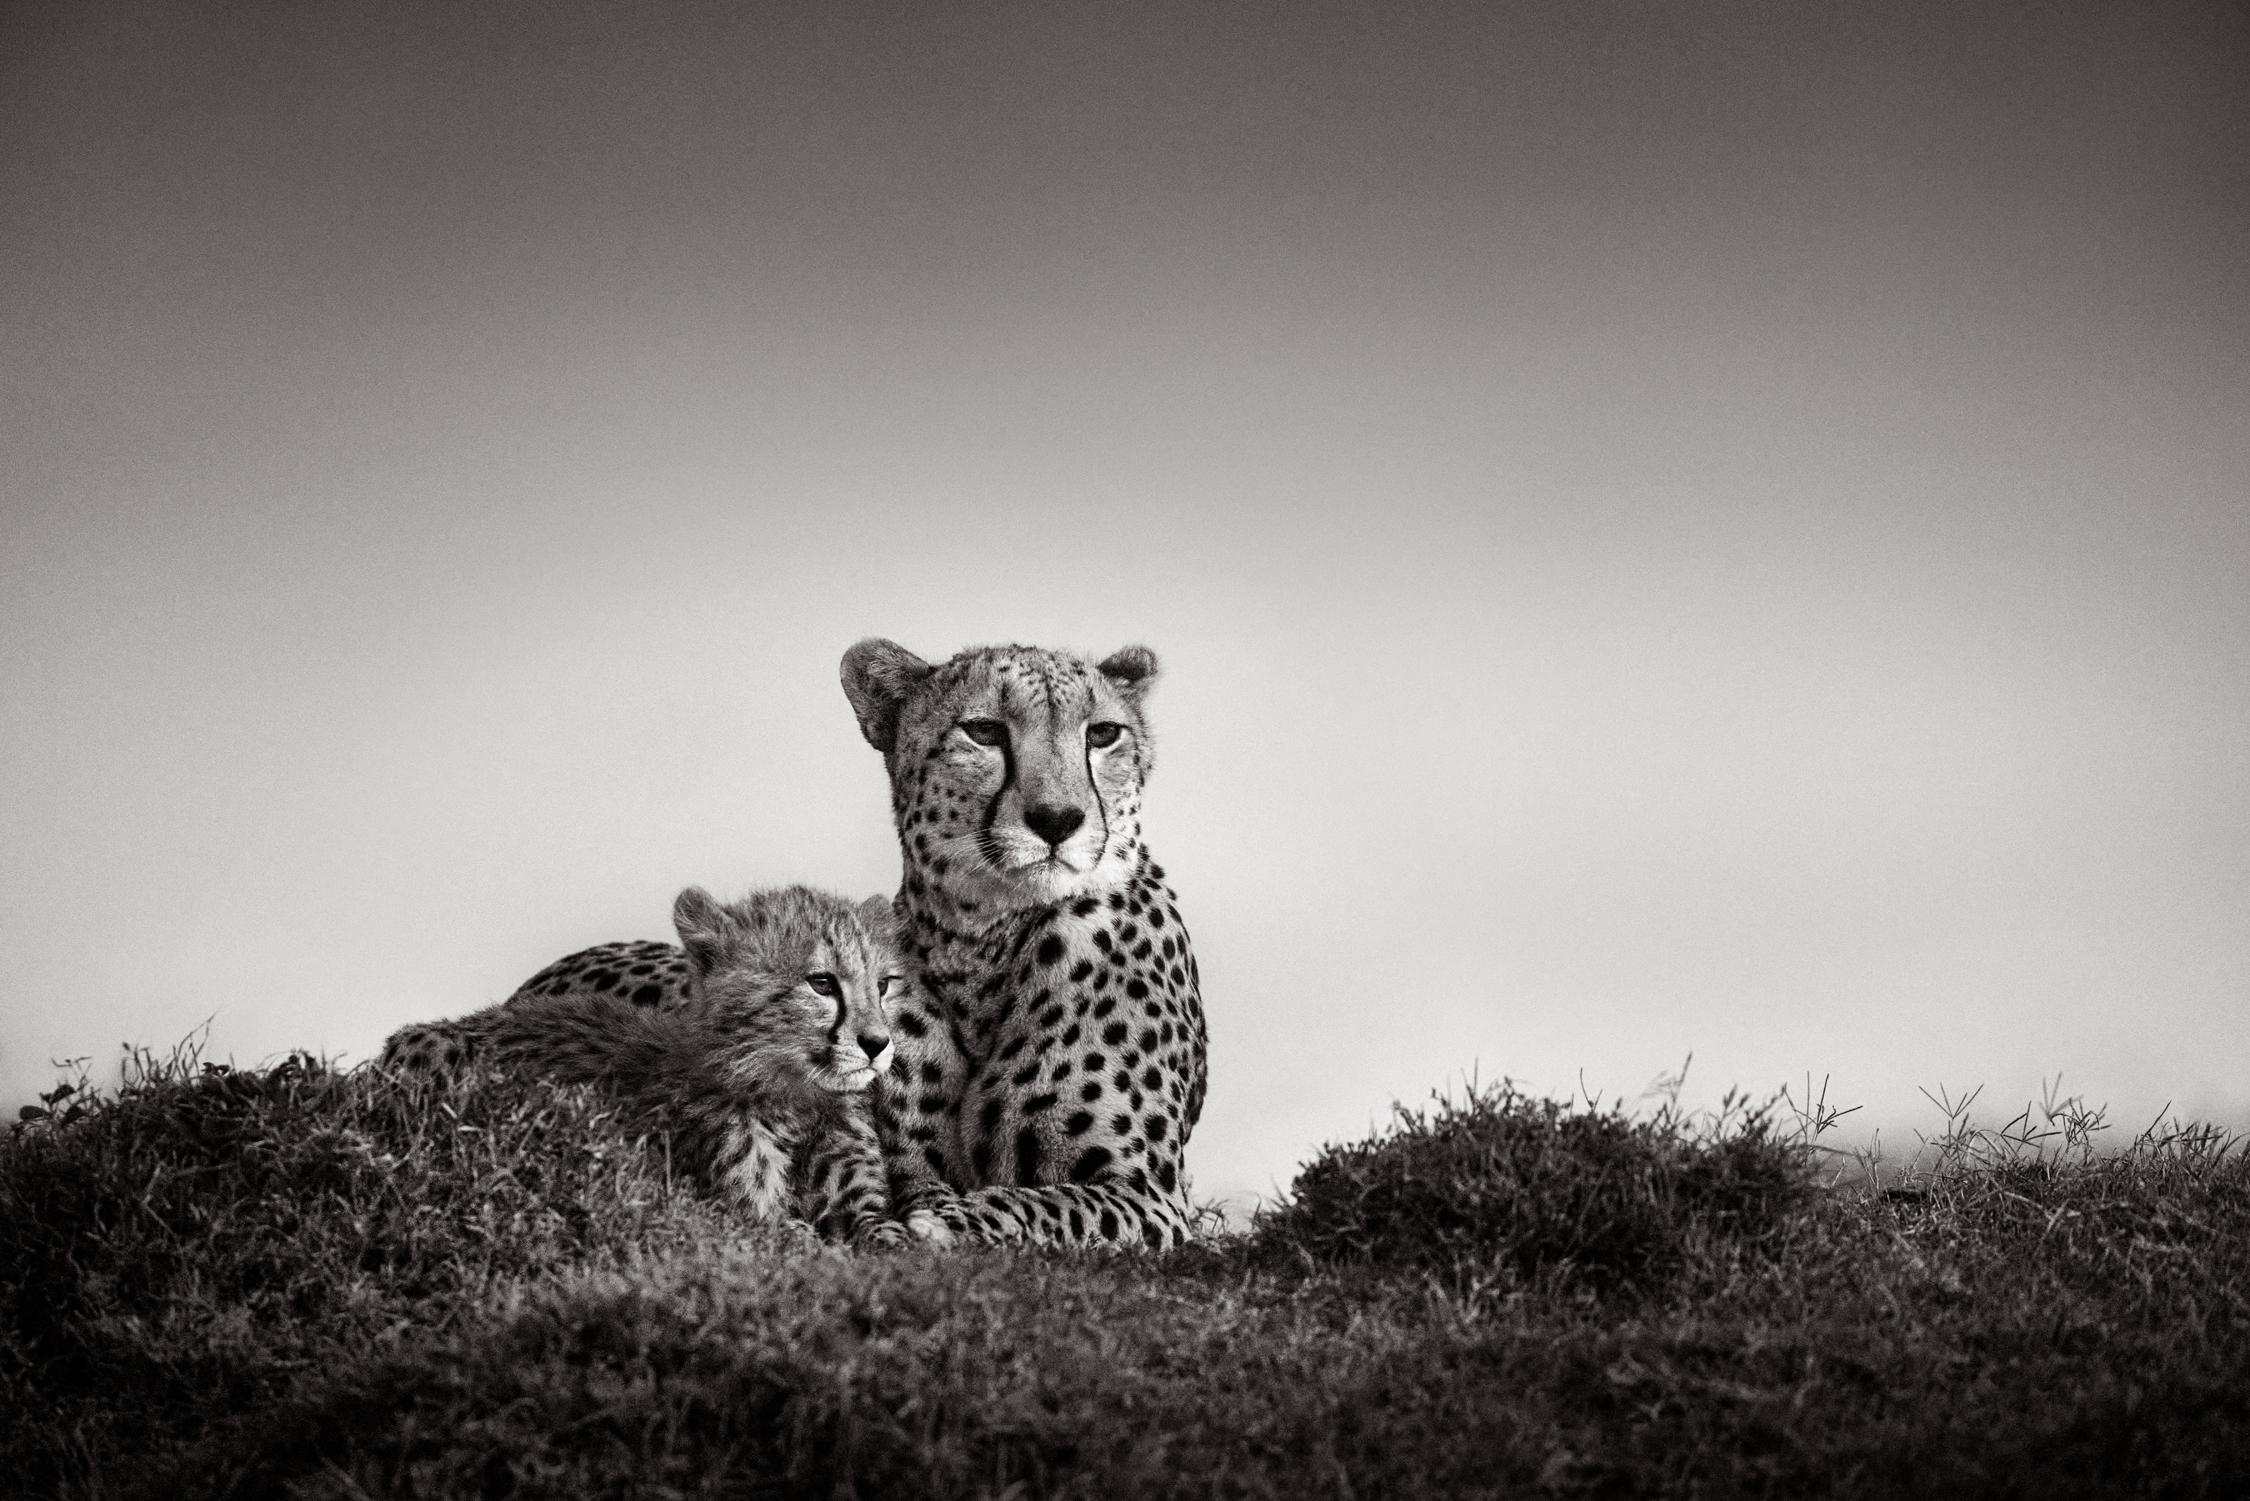 Drew Doggett Black and White Photograph - A mother cheetah looks out over the plains while guarding her cub